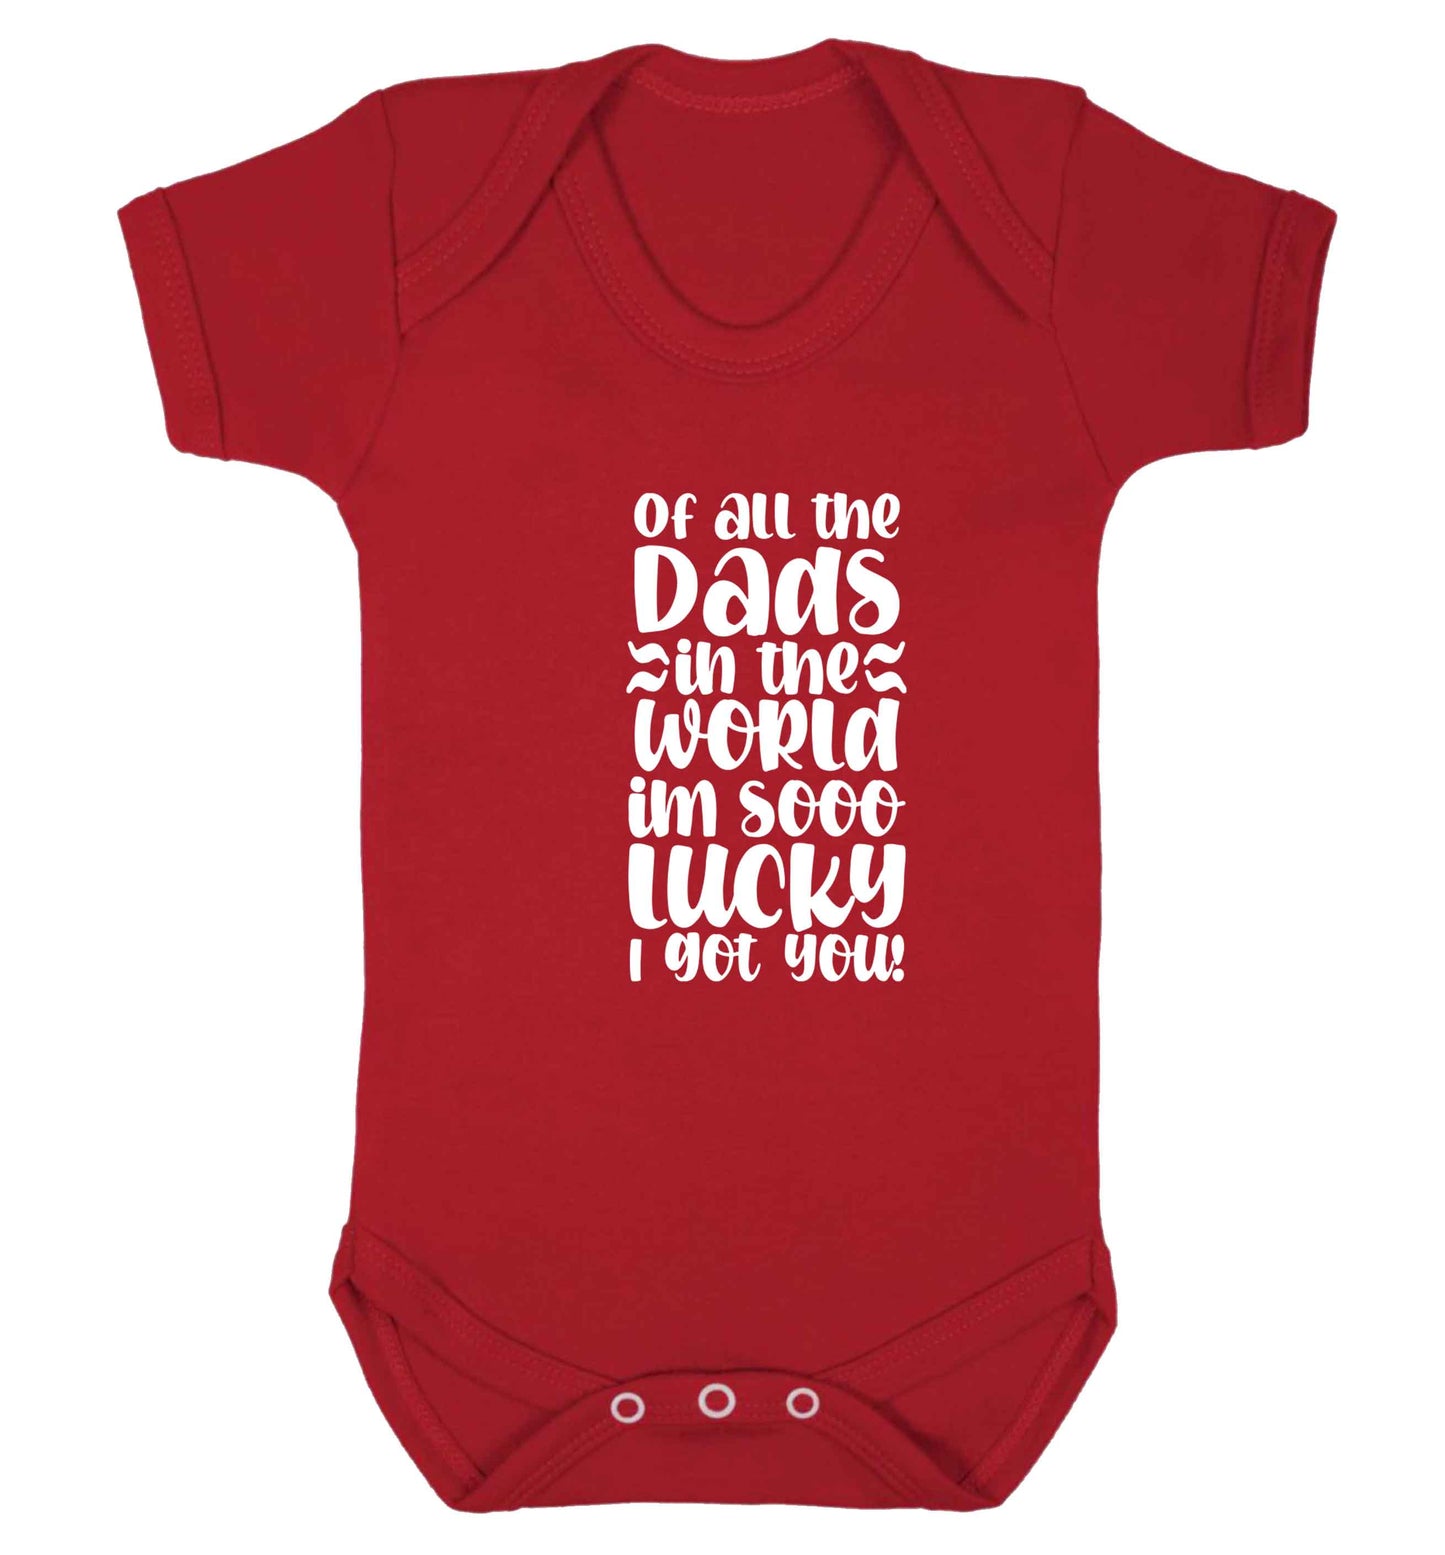 I'm as lucky as can be the worlds greatest dad belongs to me! baby vest red 18-24 months